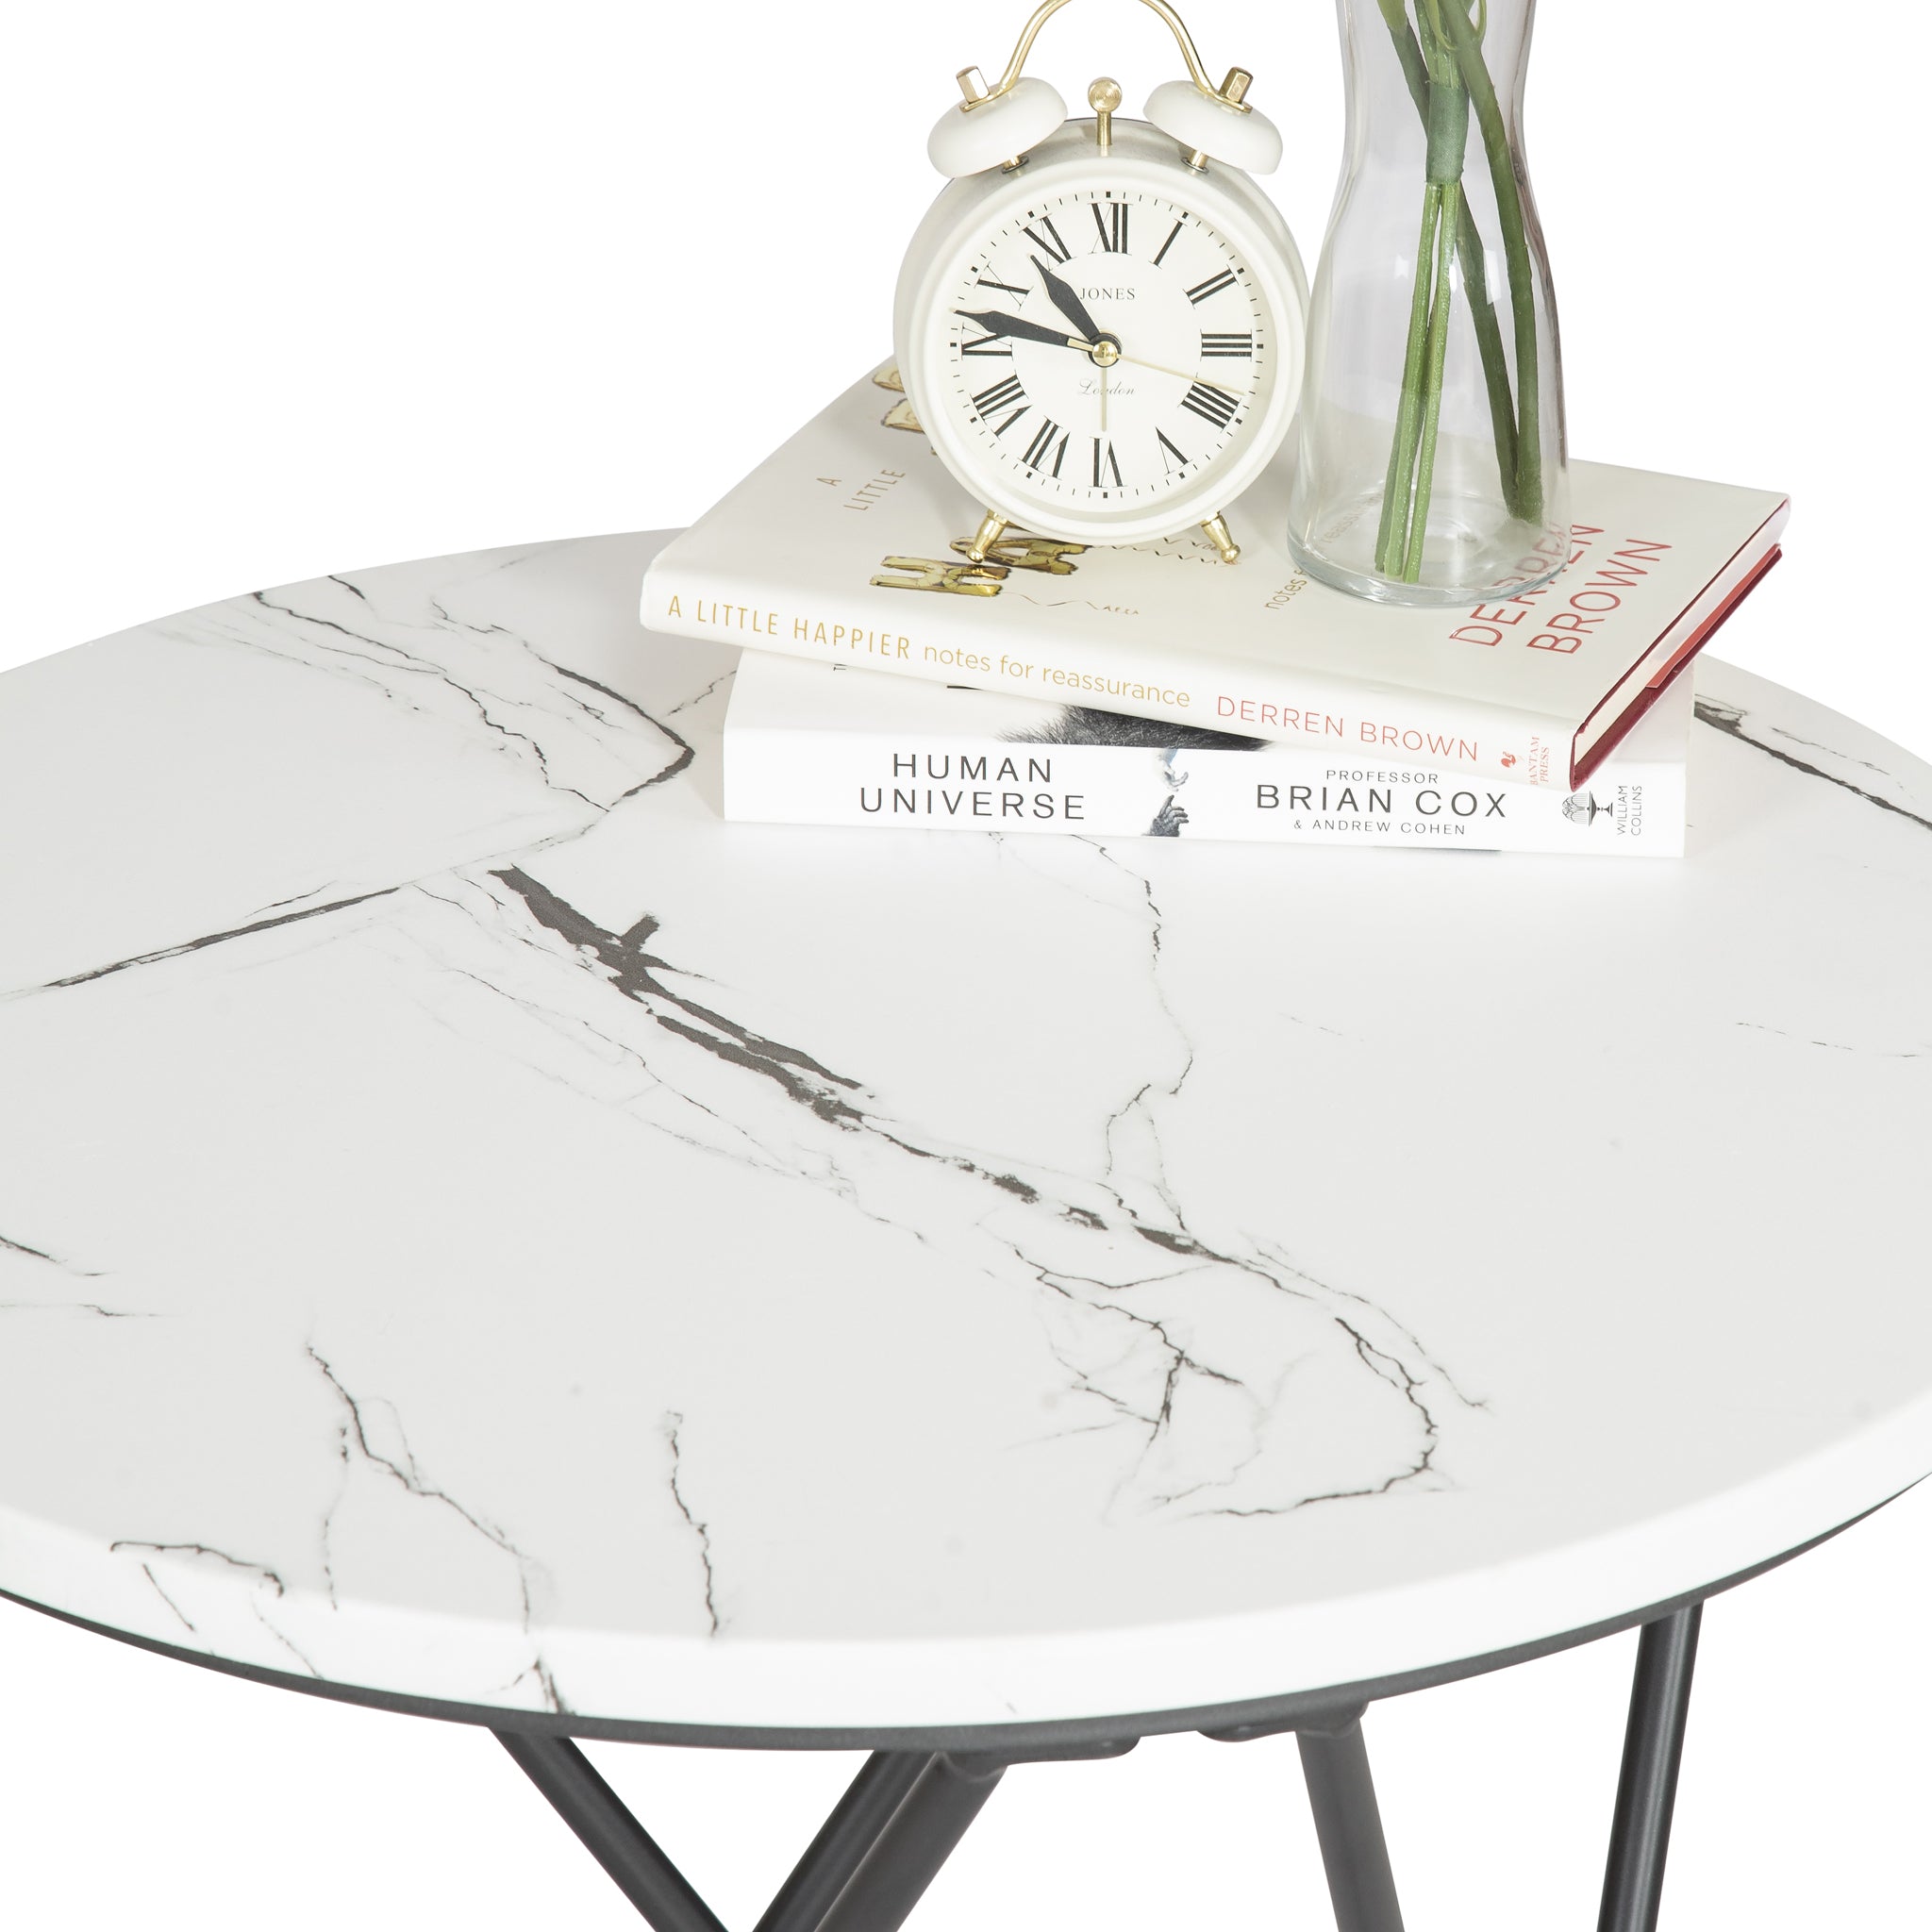 Marble Effect End Table With Metal Legs - 50 x 60cm